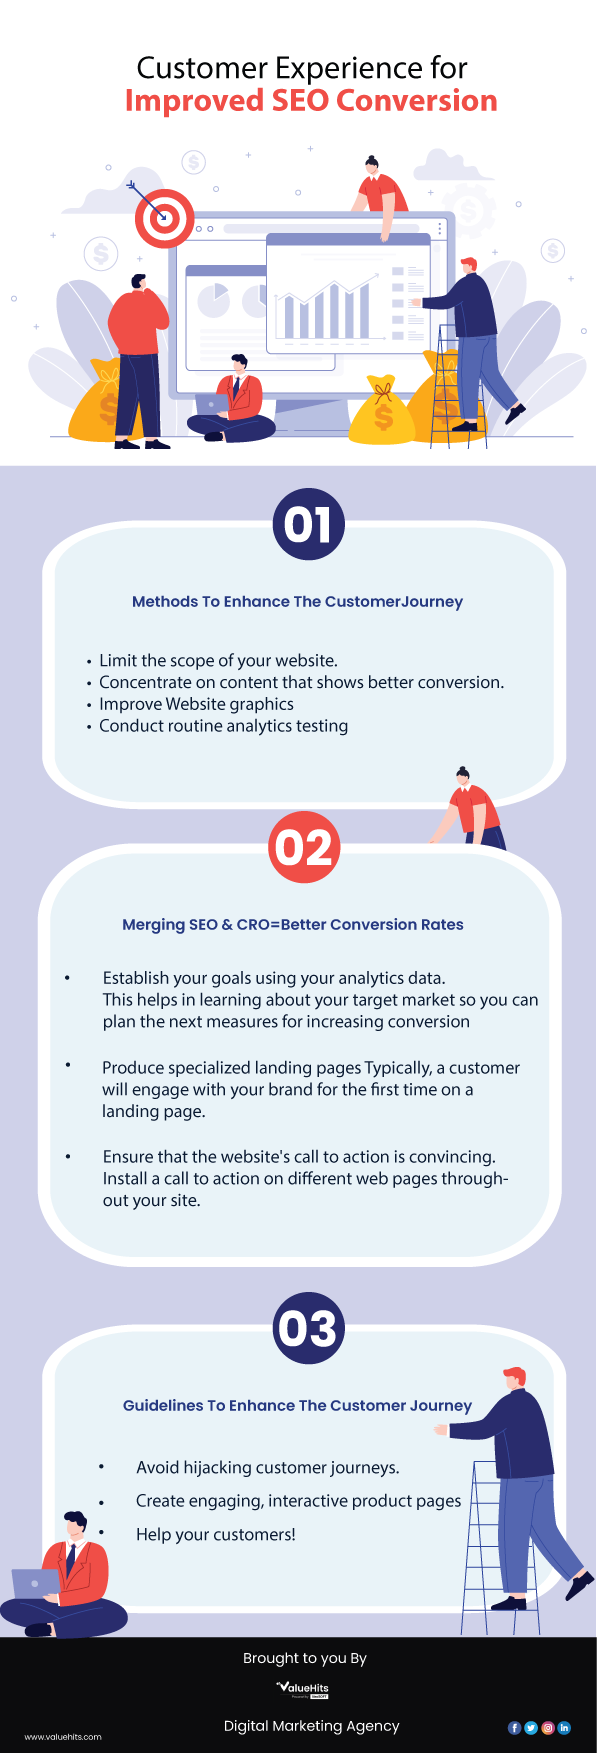 CUSTOMER EXPERIENCE FOR IMPROVED SEO CONVERSION